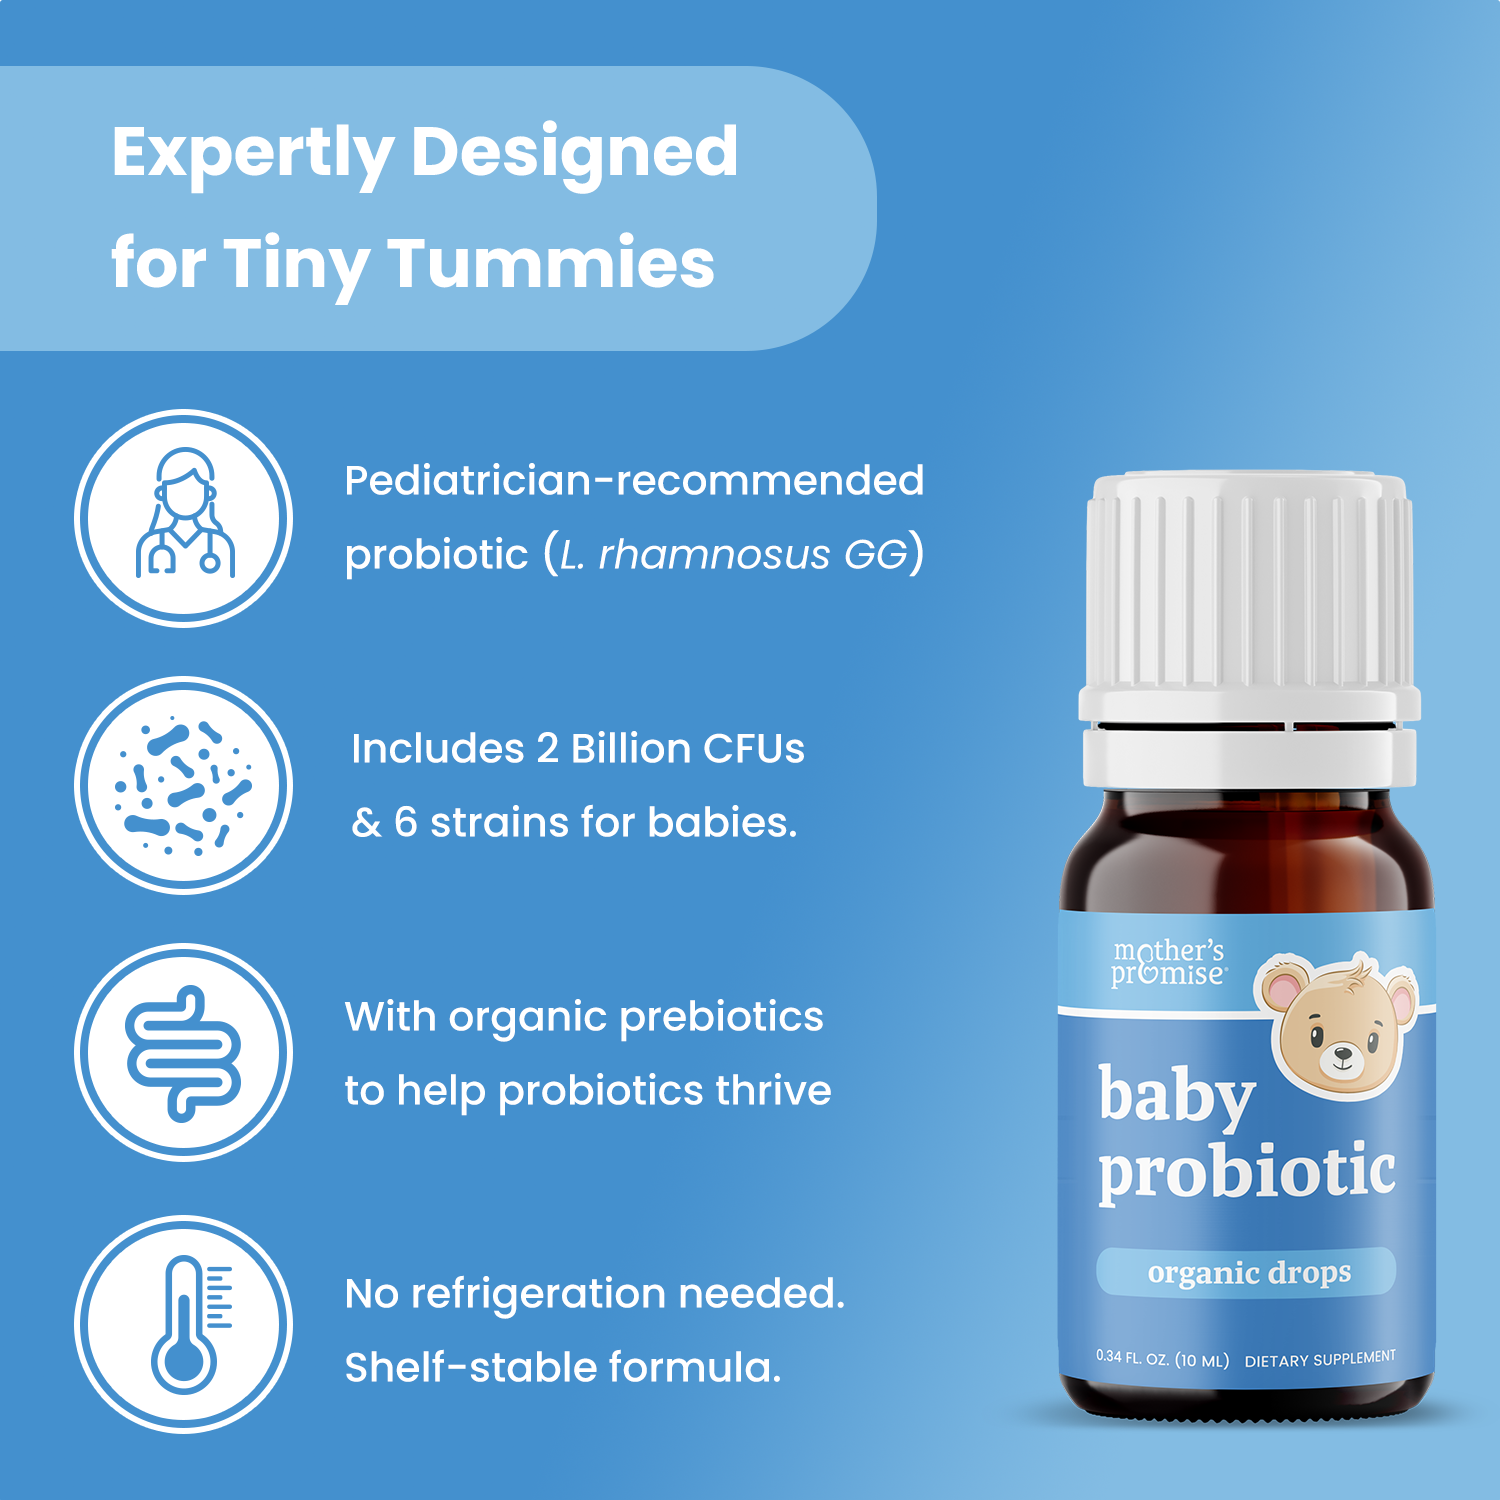 Mother's Promise Baby Probiotic - Organic Drops